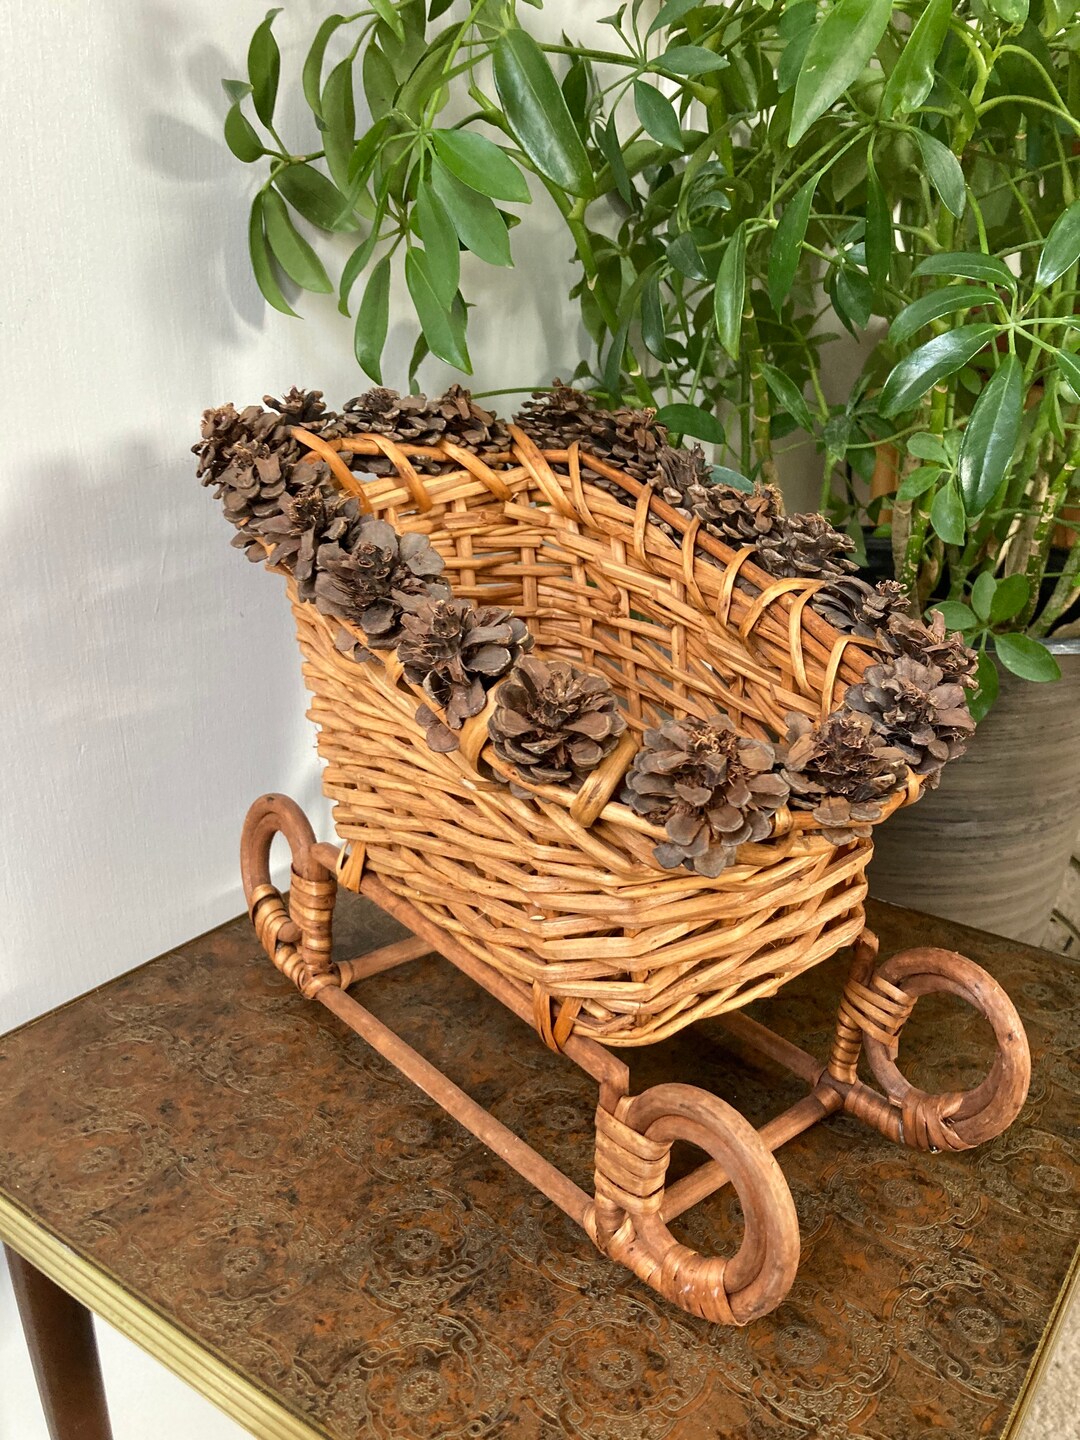 Sleigh basket with pine cones Etsy 日本